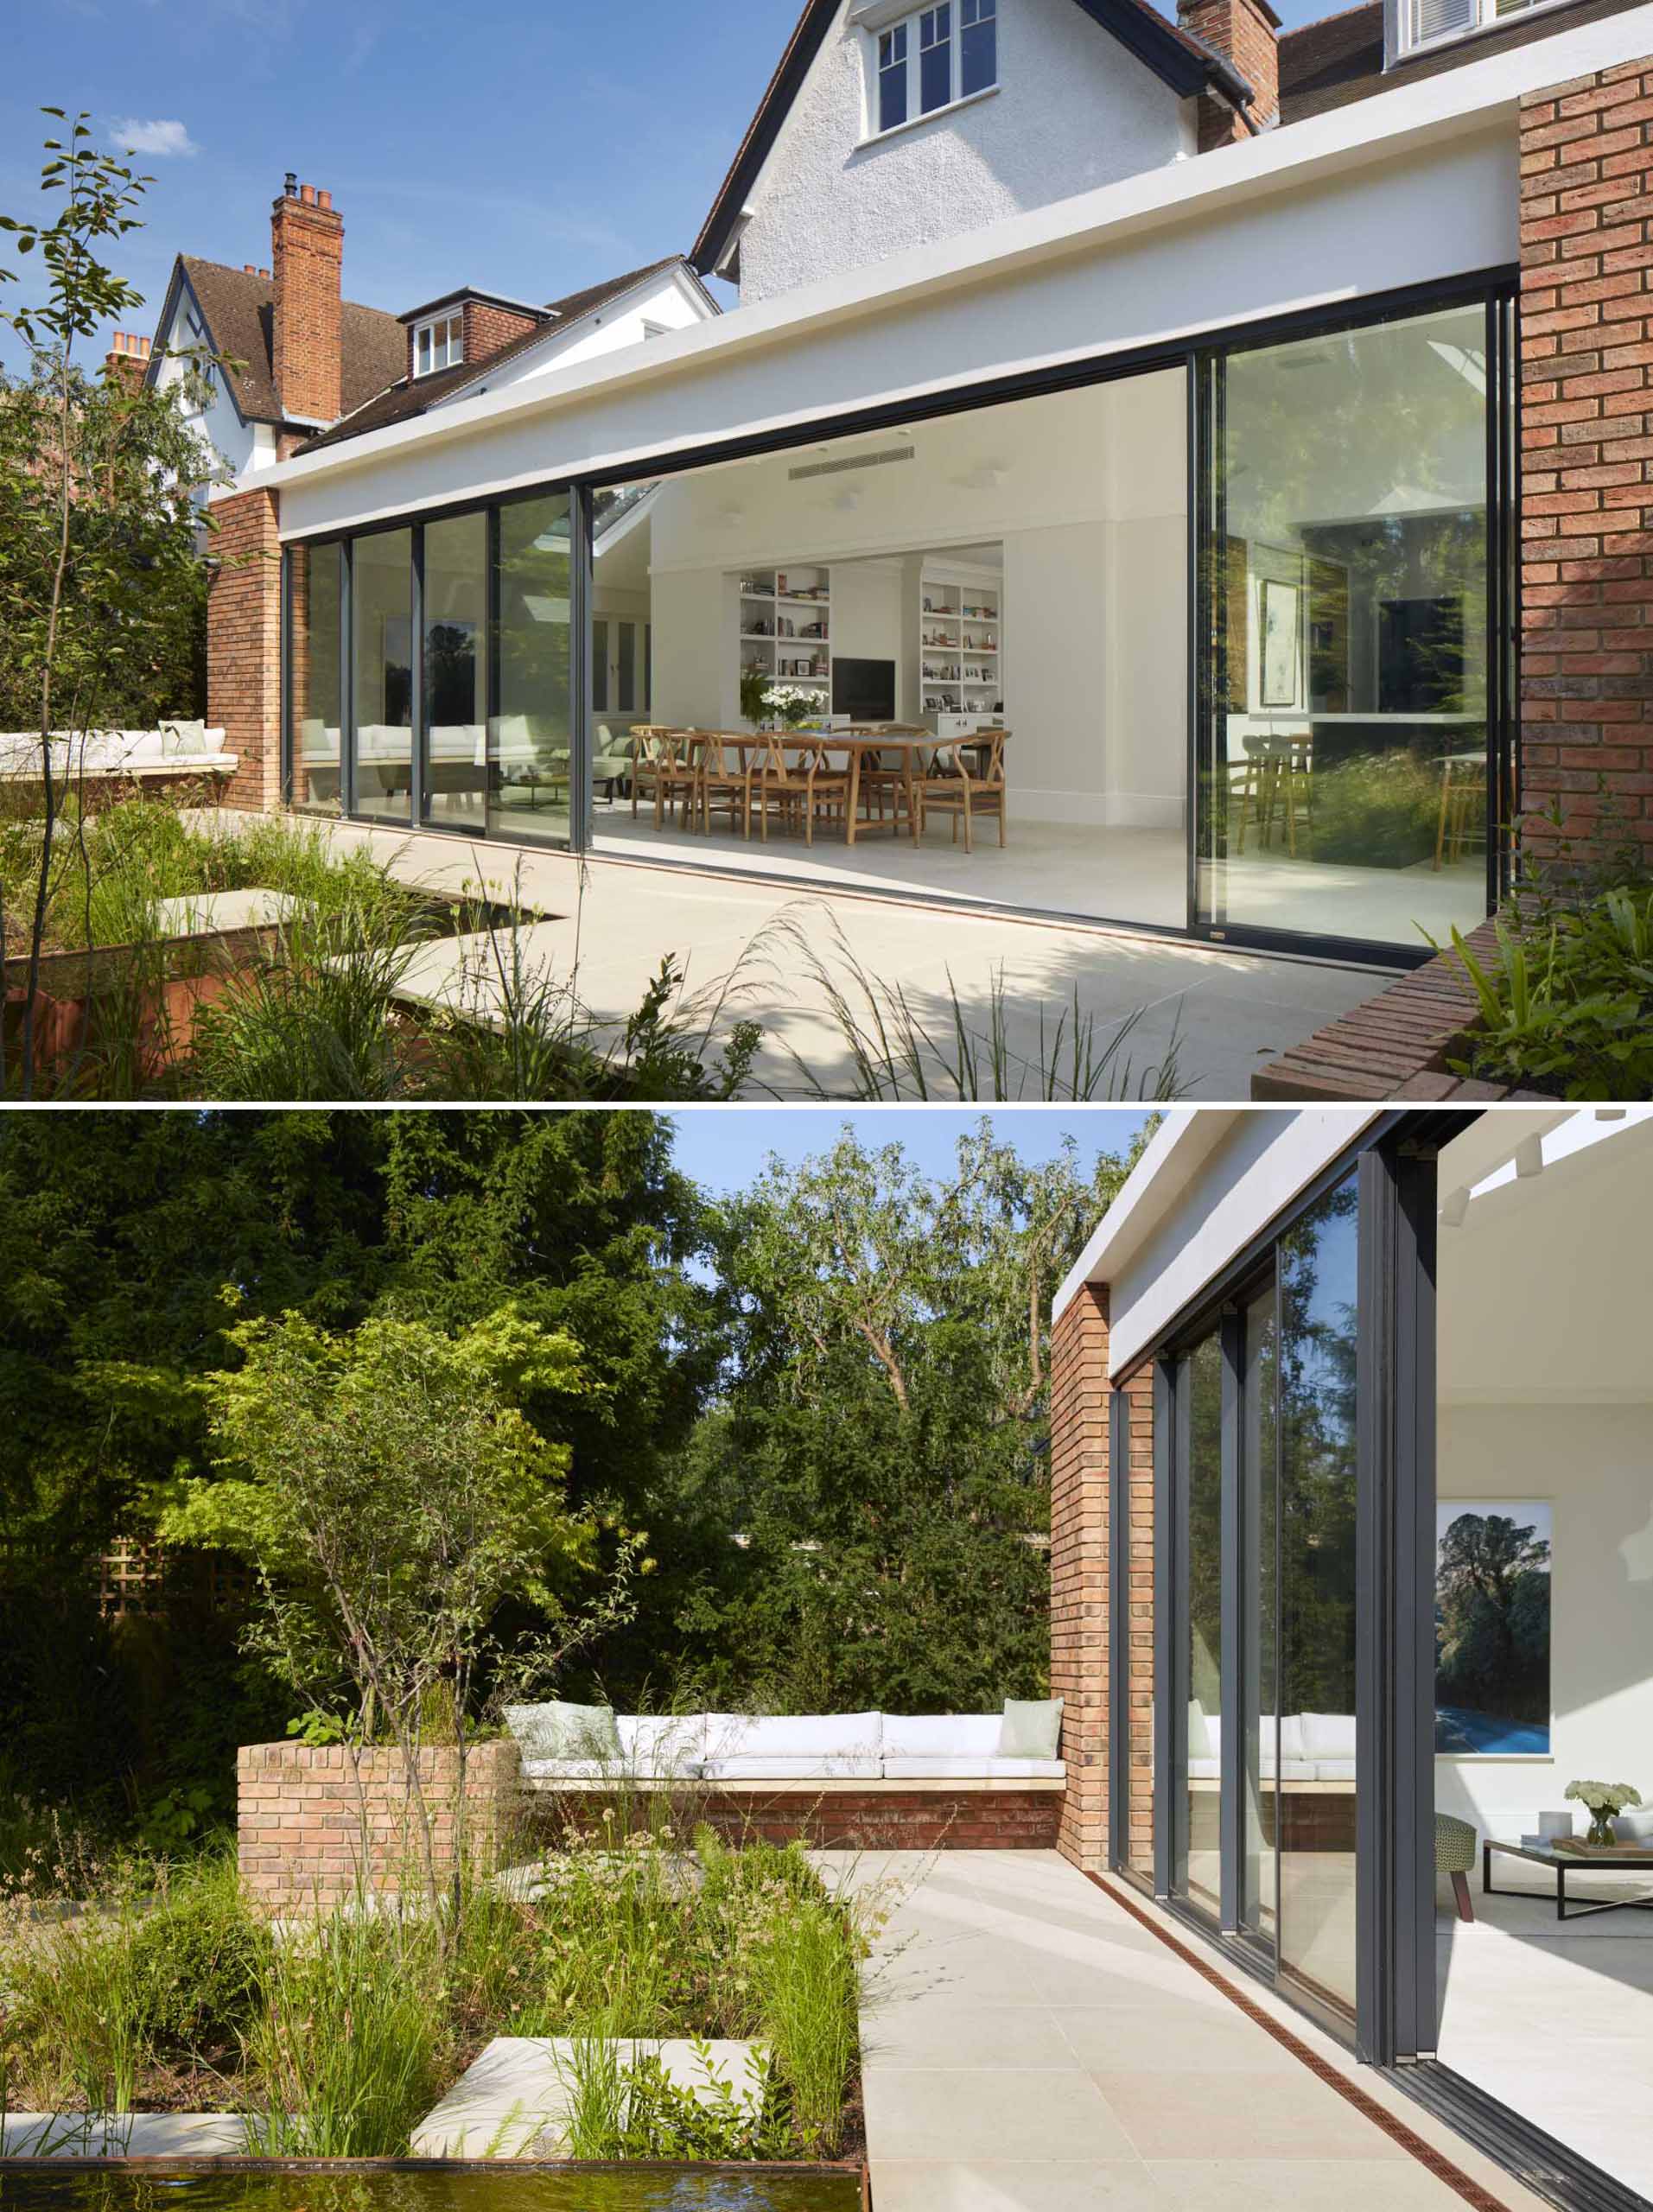 An updated brick extension for an Edwardian home.